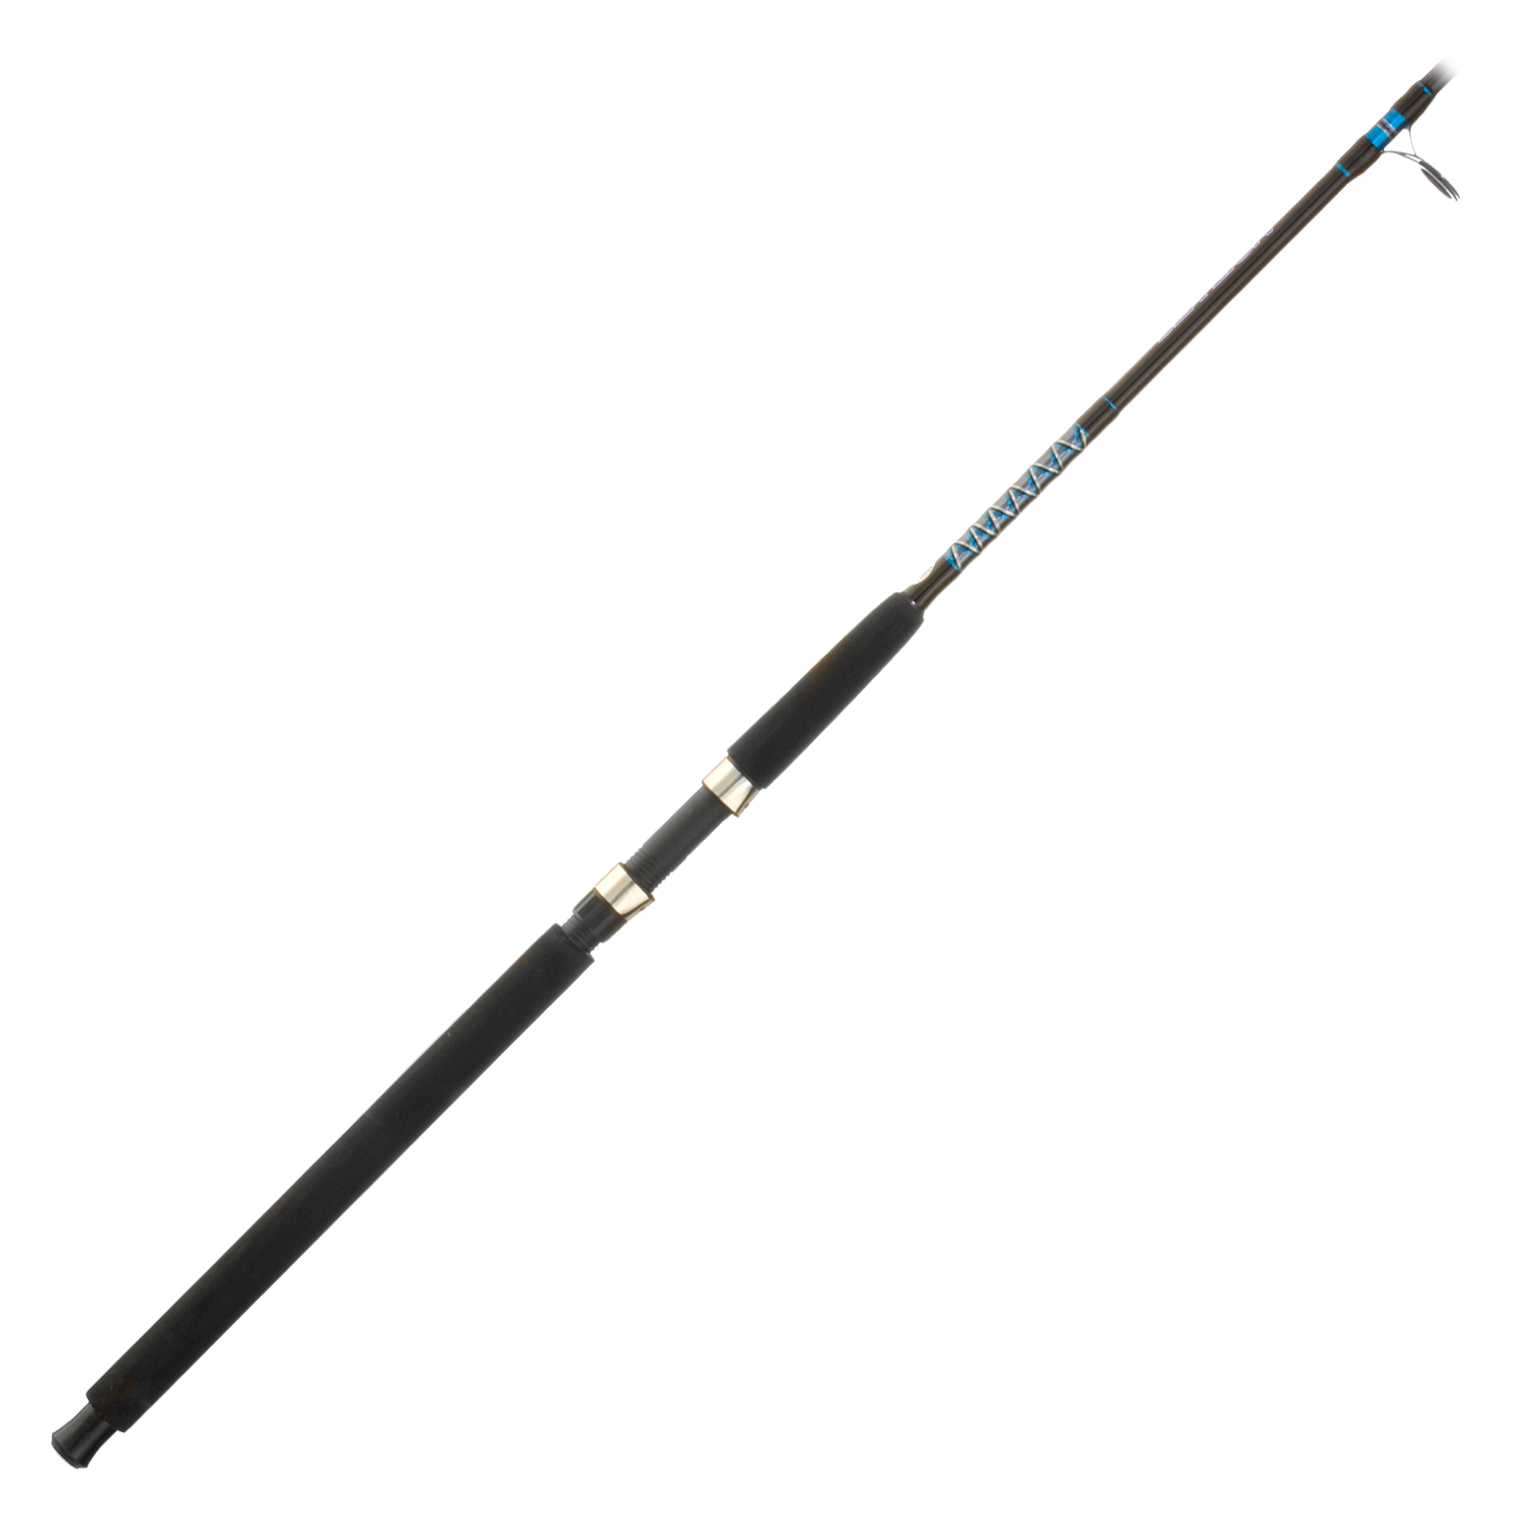 SHAKESPEARE TRAVEL MATE FISHING ROD AND REEL